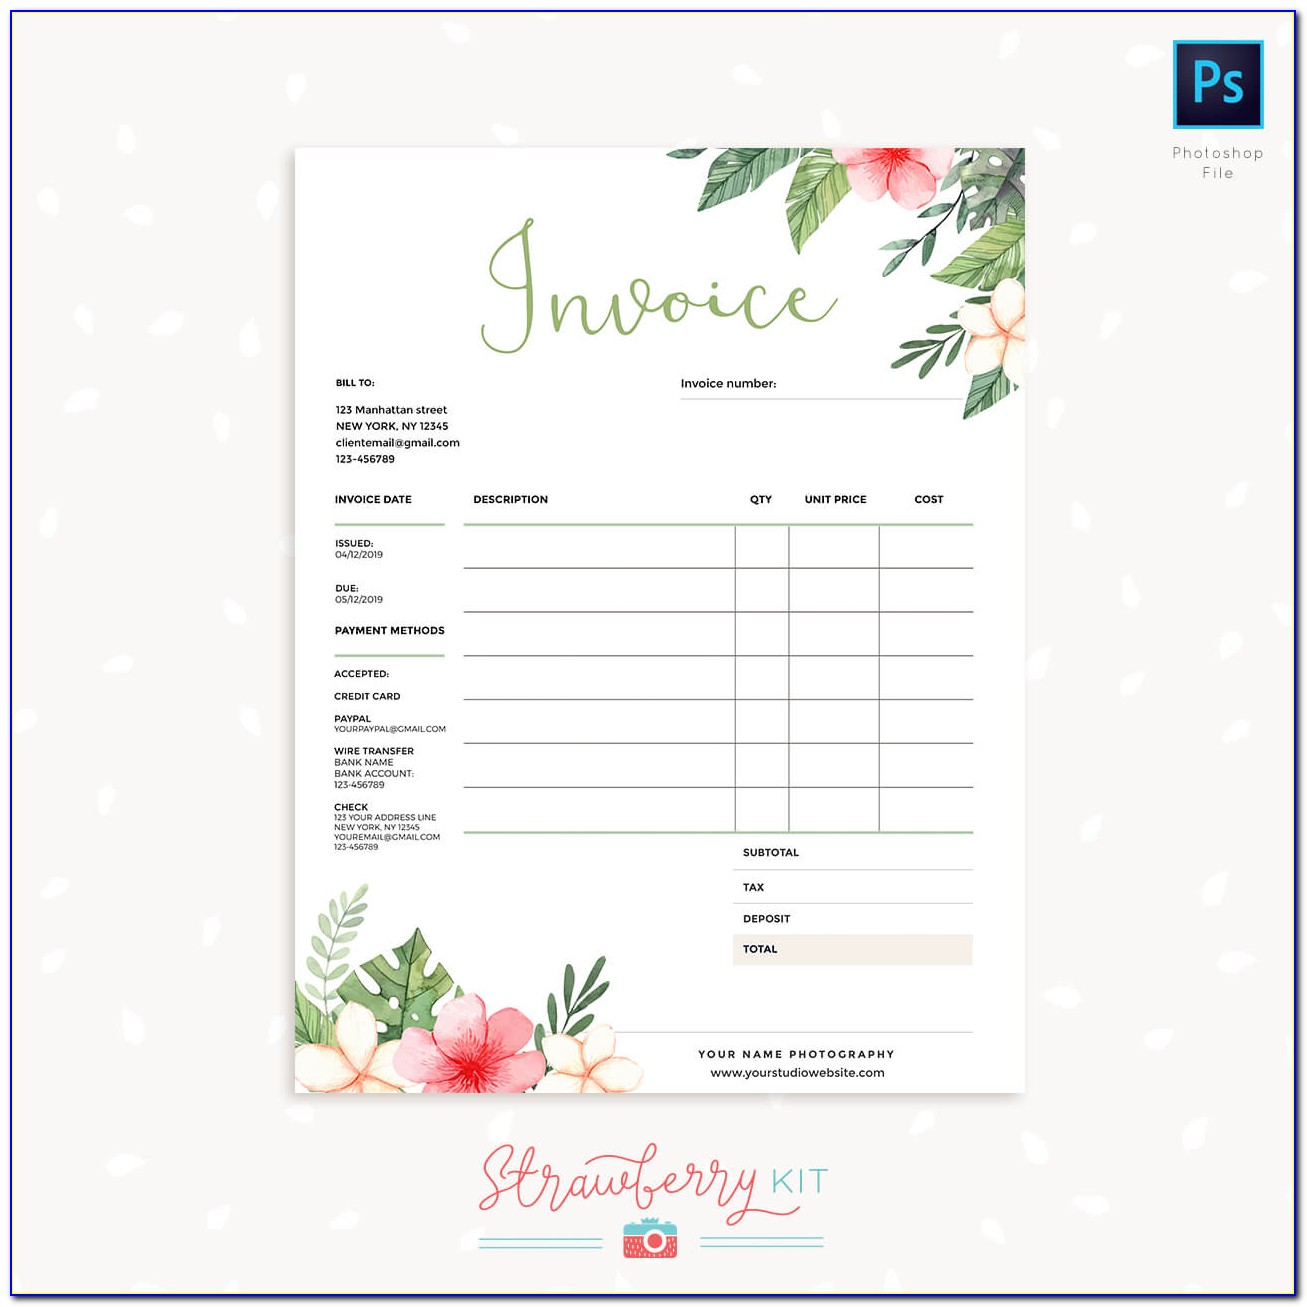 Floral Invoice Template Free